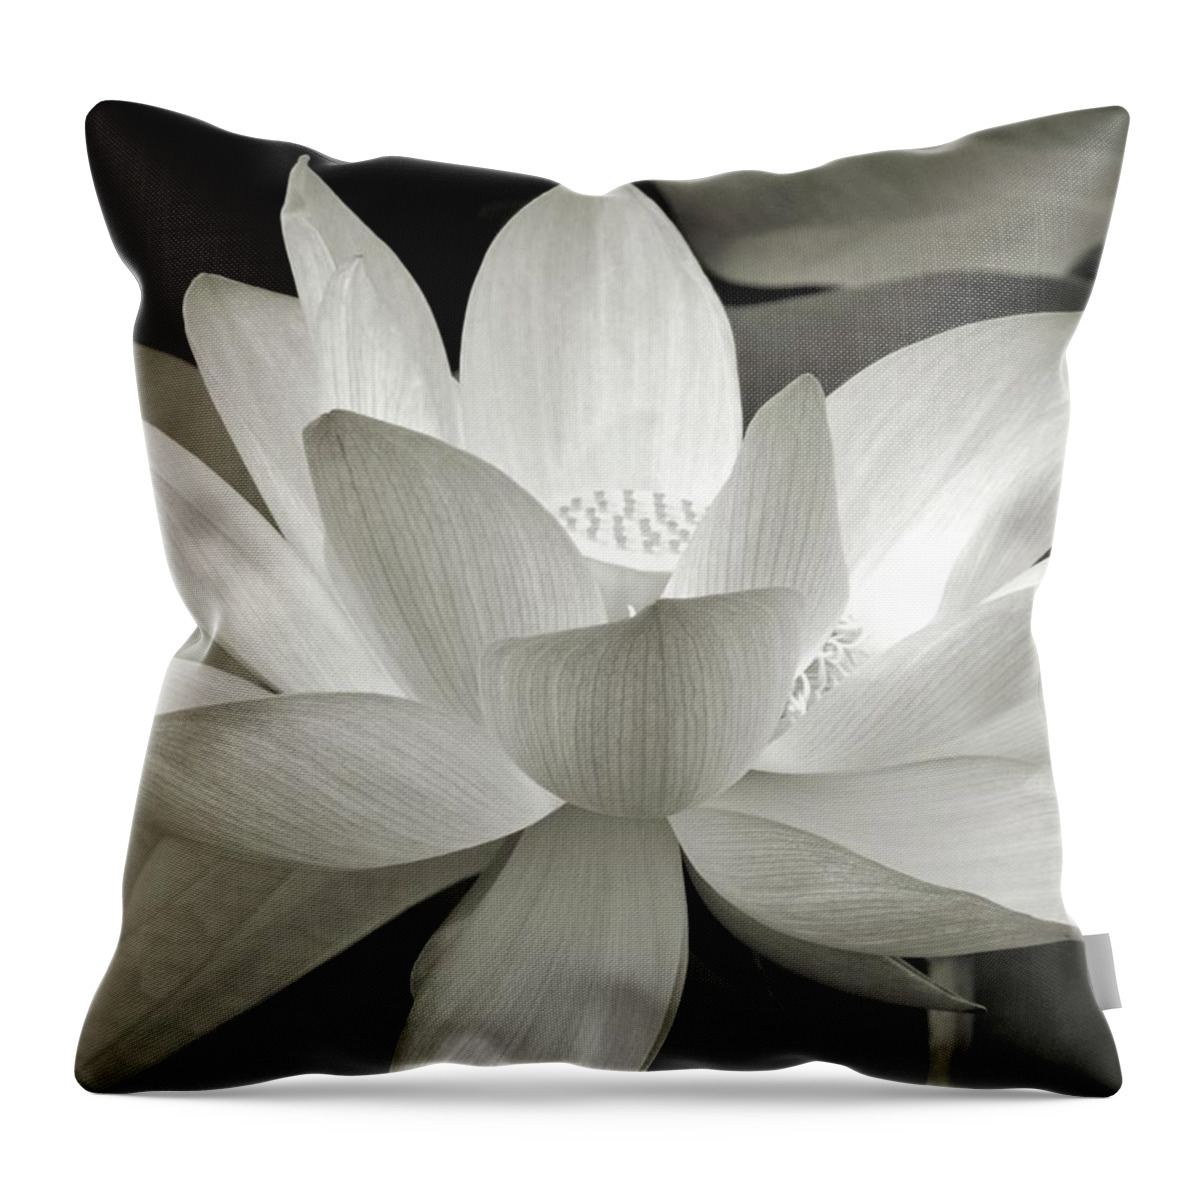 Lotus Throw Pillow featuring the photograph Lotus by Jennifer Wheatley Wolf